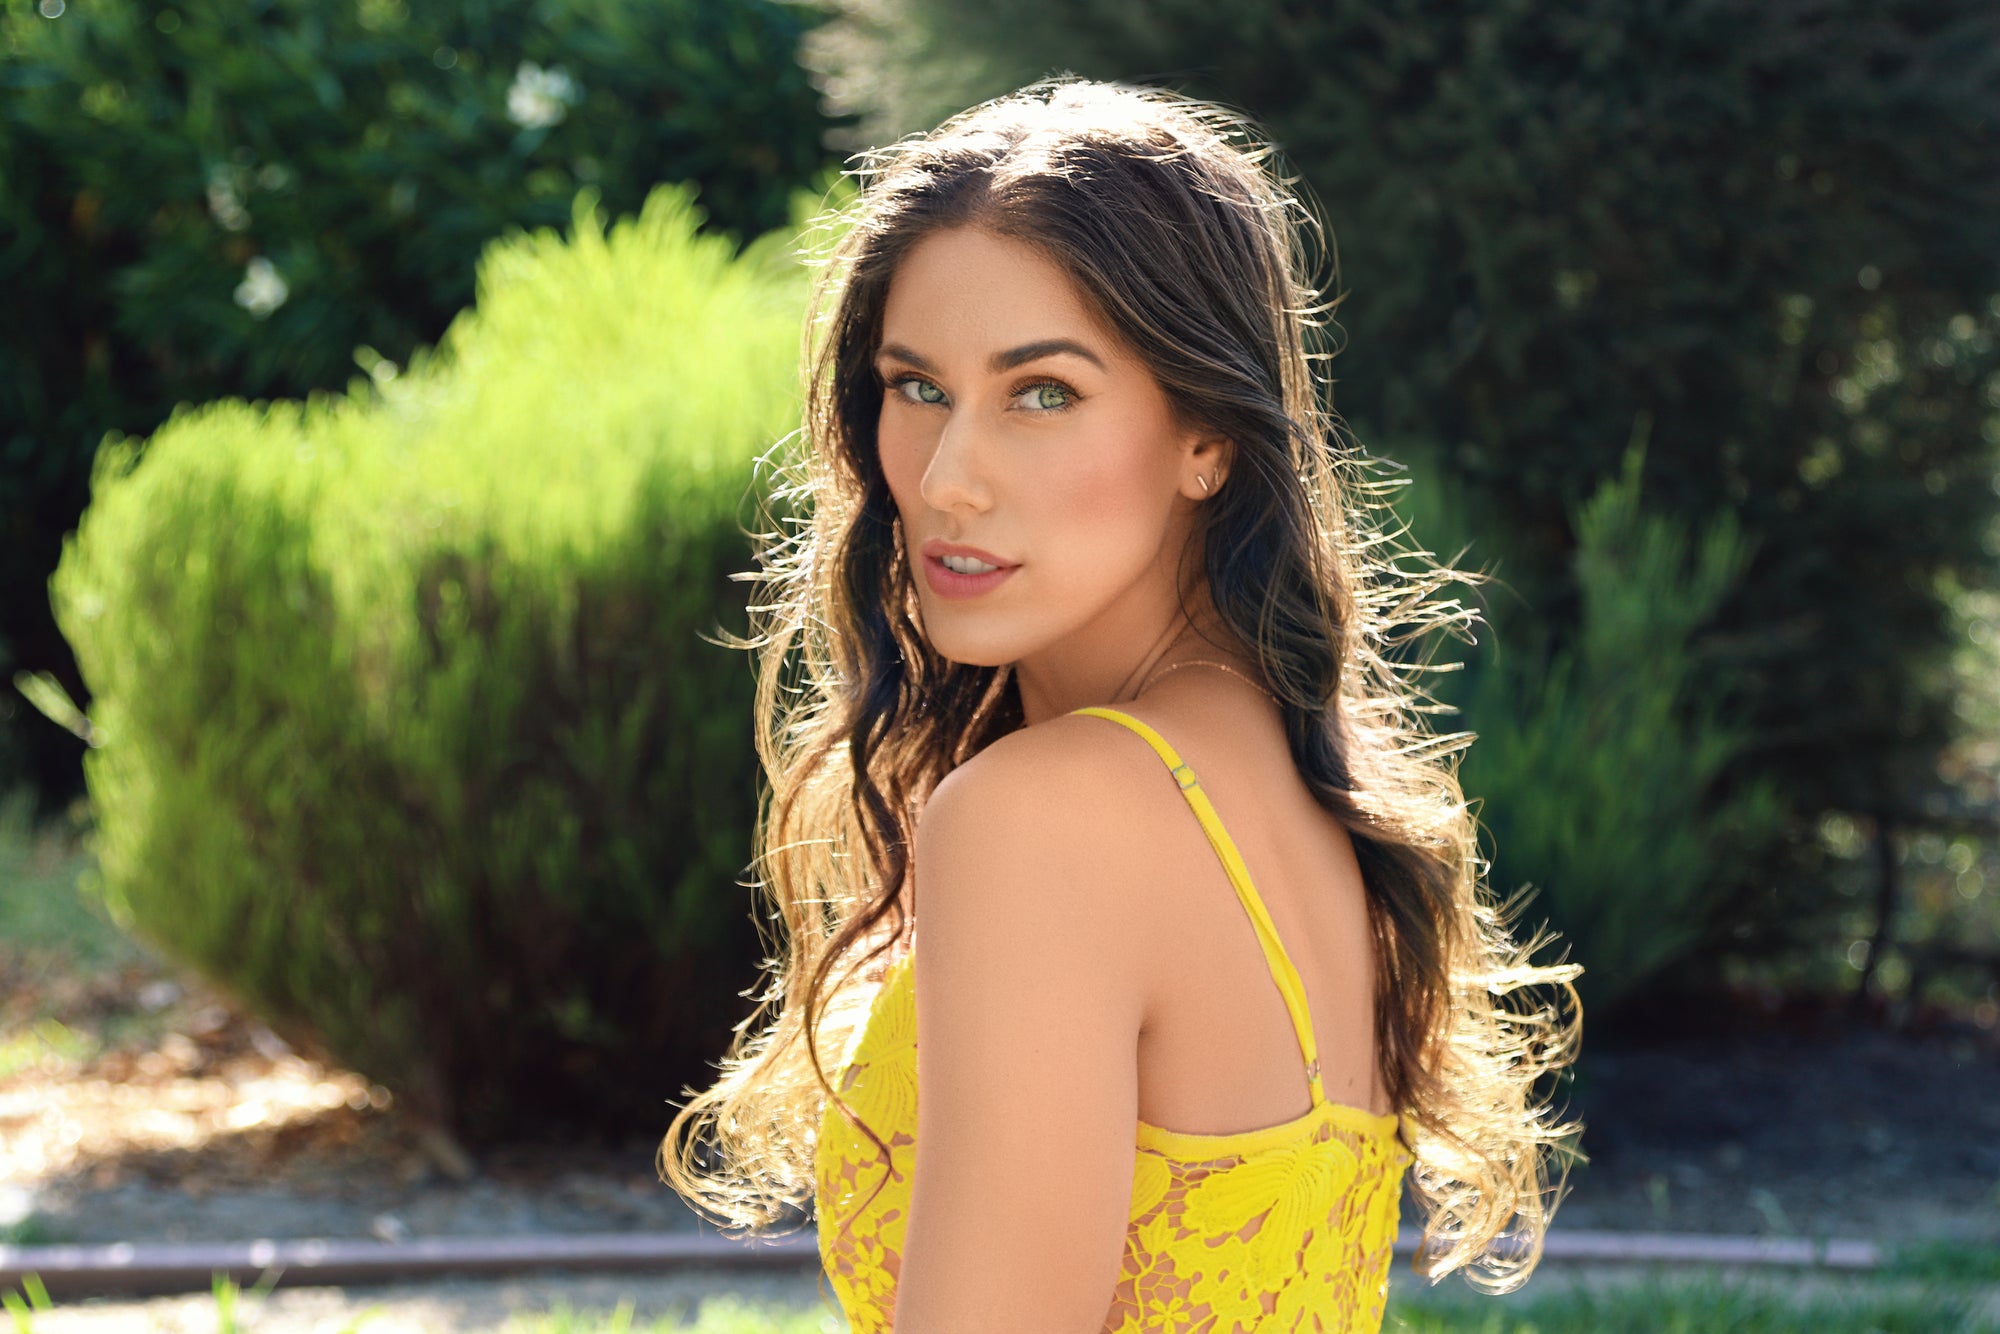 Cassandra bankson sitting on the grass at a park with sunlight falling through hair in a yellow lace dress with butterflies looking over shoulder wearing spf makeup